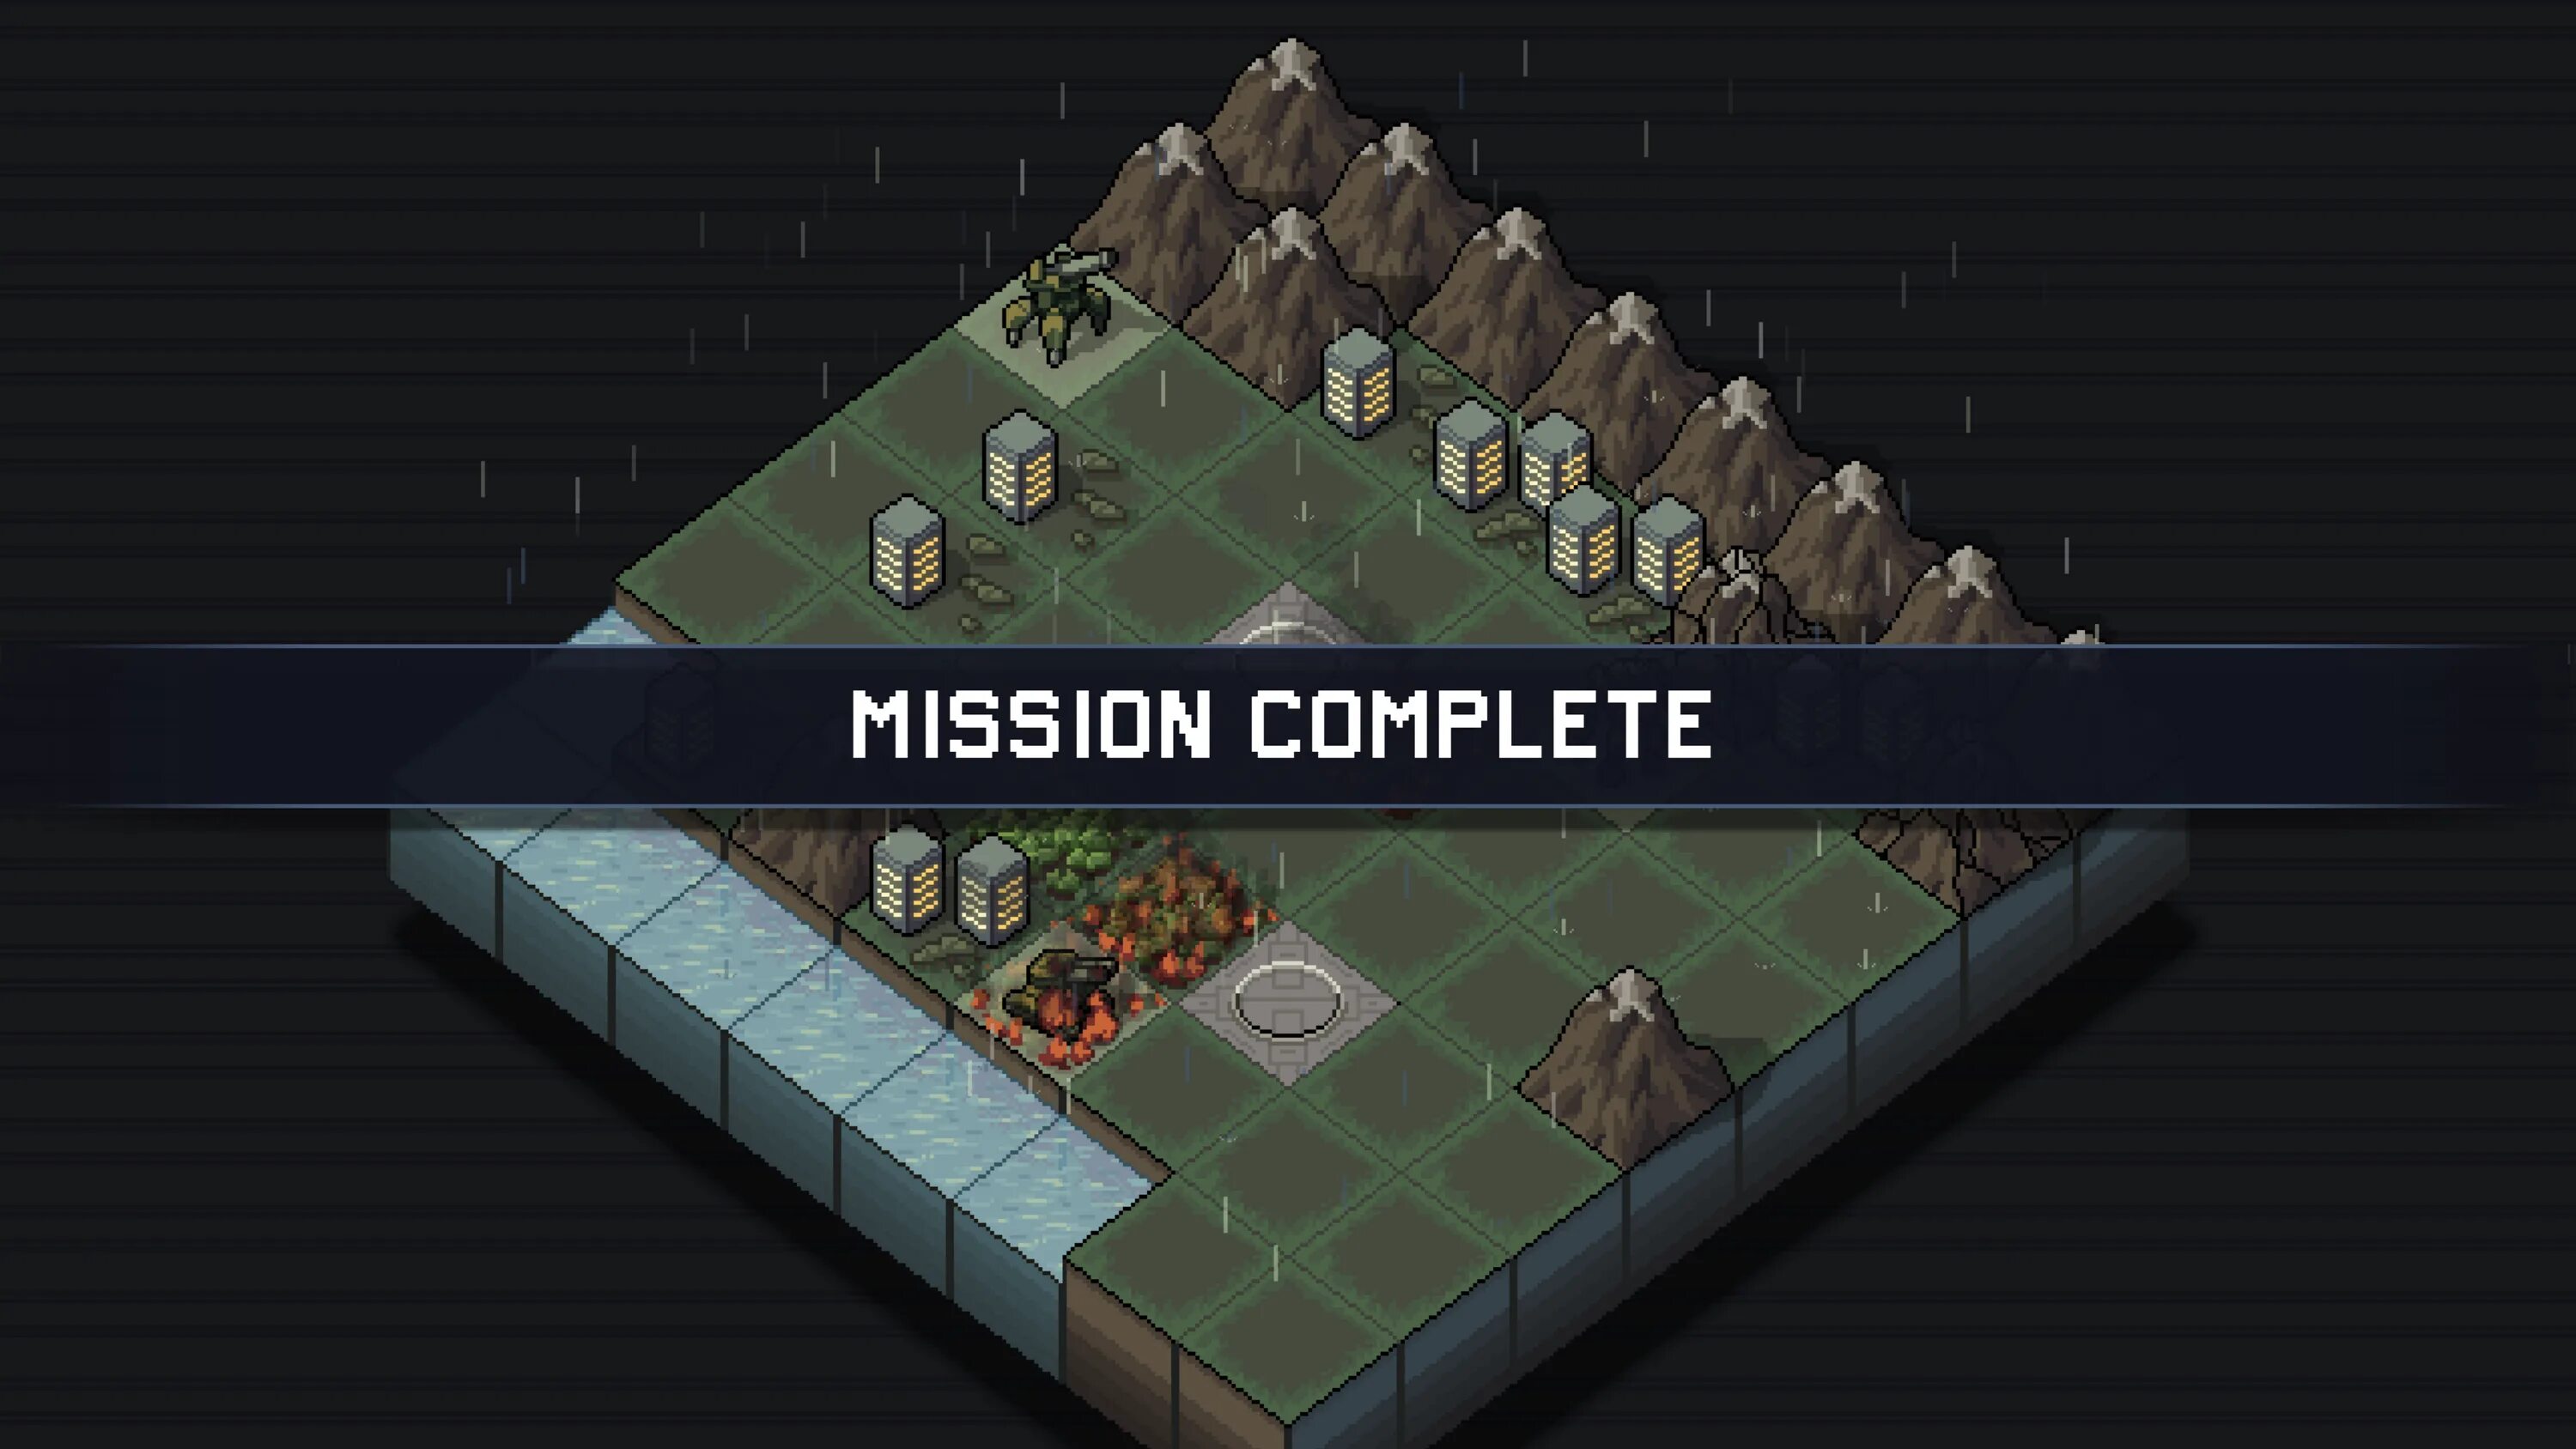 Compile into. Mission completed игра. Миссия комплит. Mission complete UI. Time Breach игра.